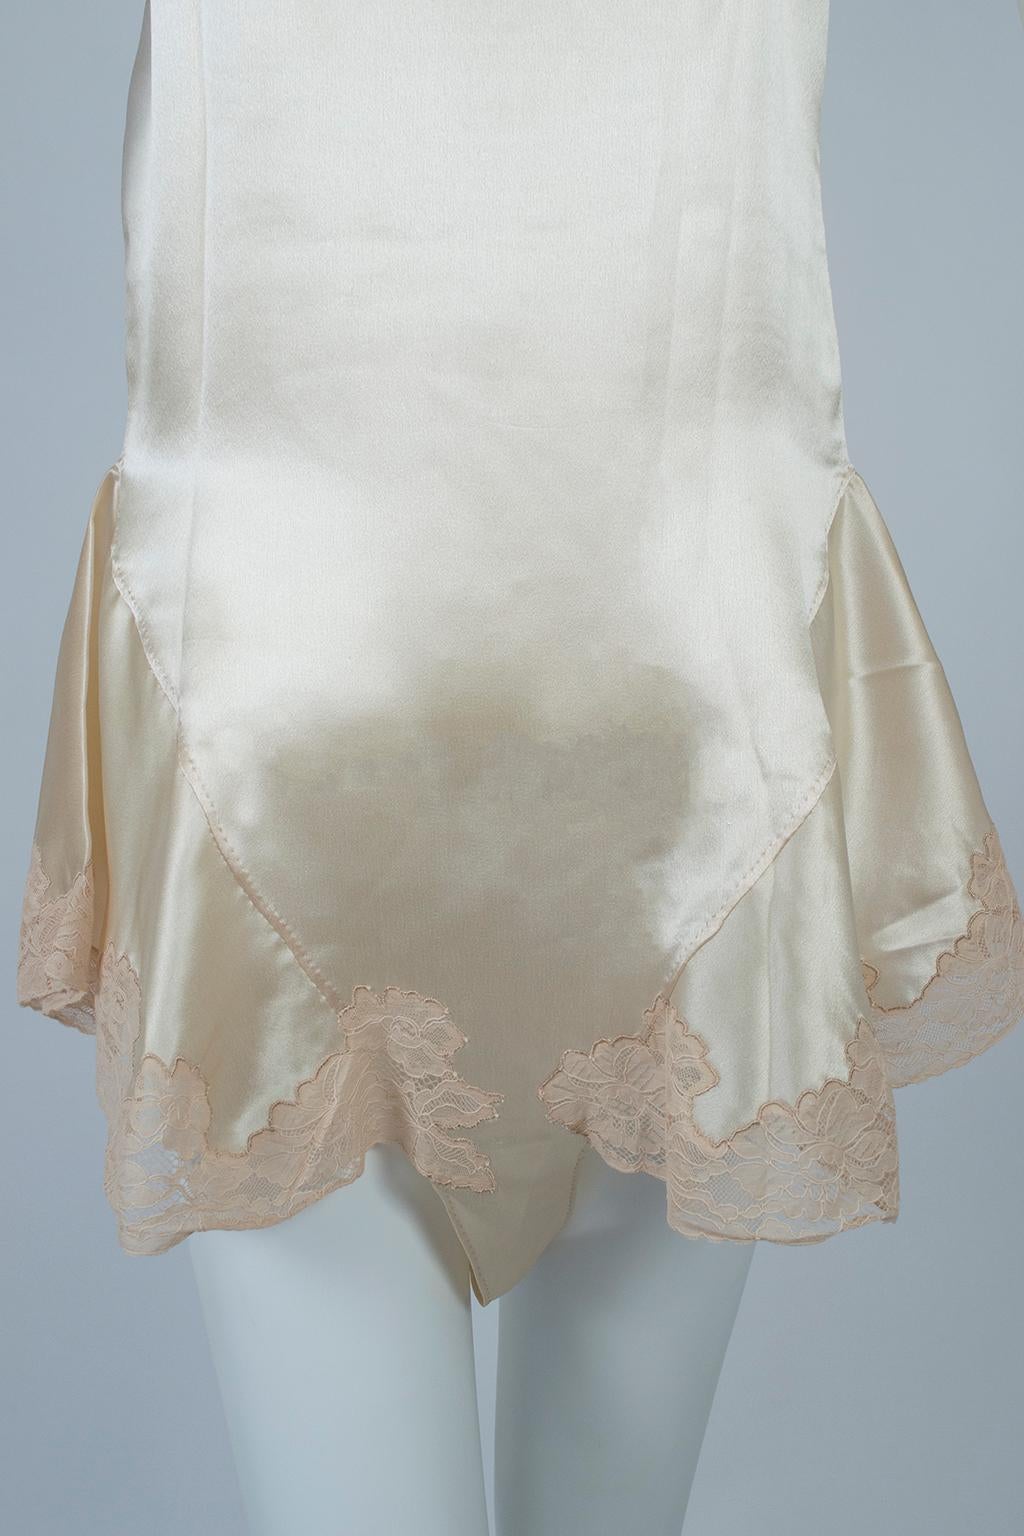 Ivory Bridal Trousseau Lacquered Satin Skirt Leg Step-In Romper Teddy –XS, 1920s For Sale 5